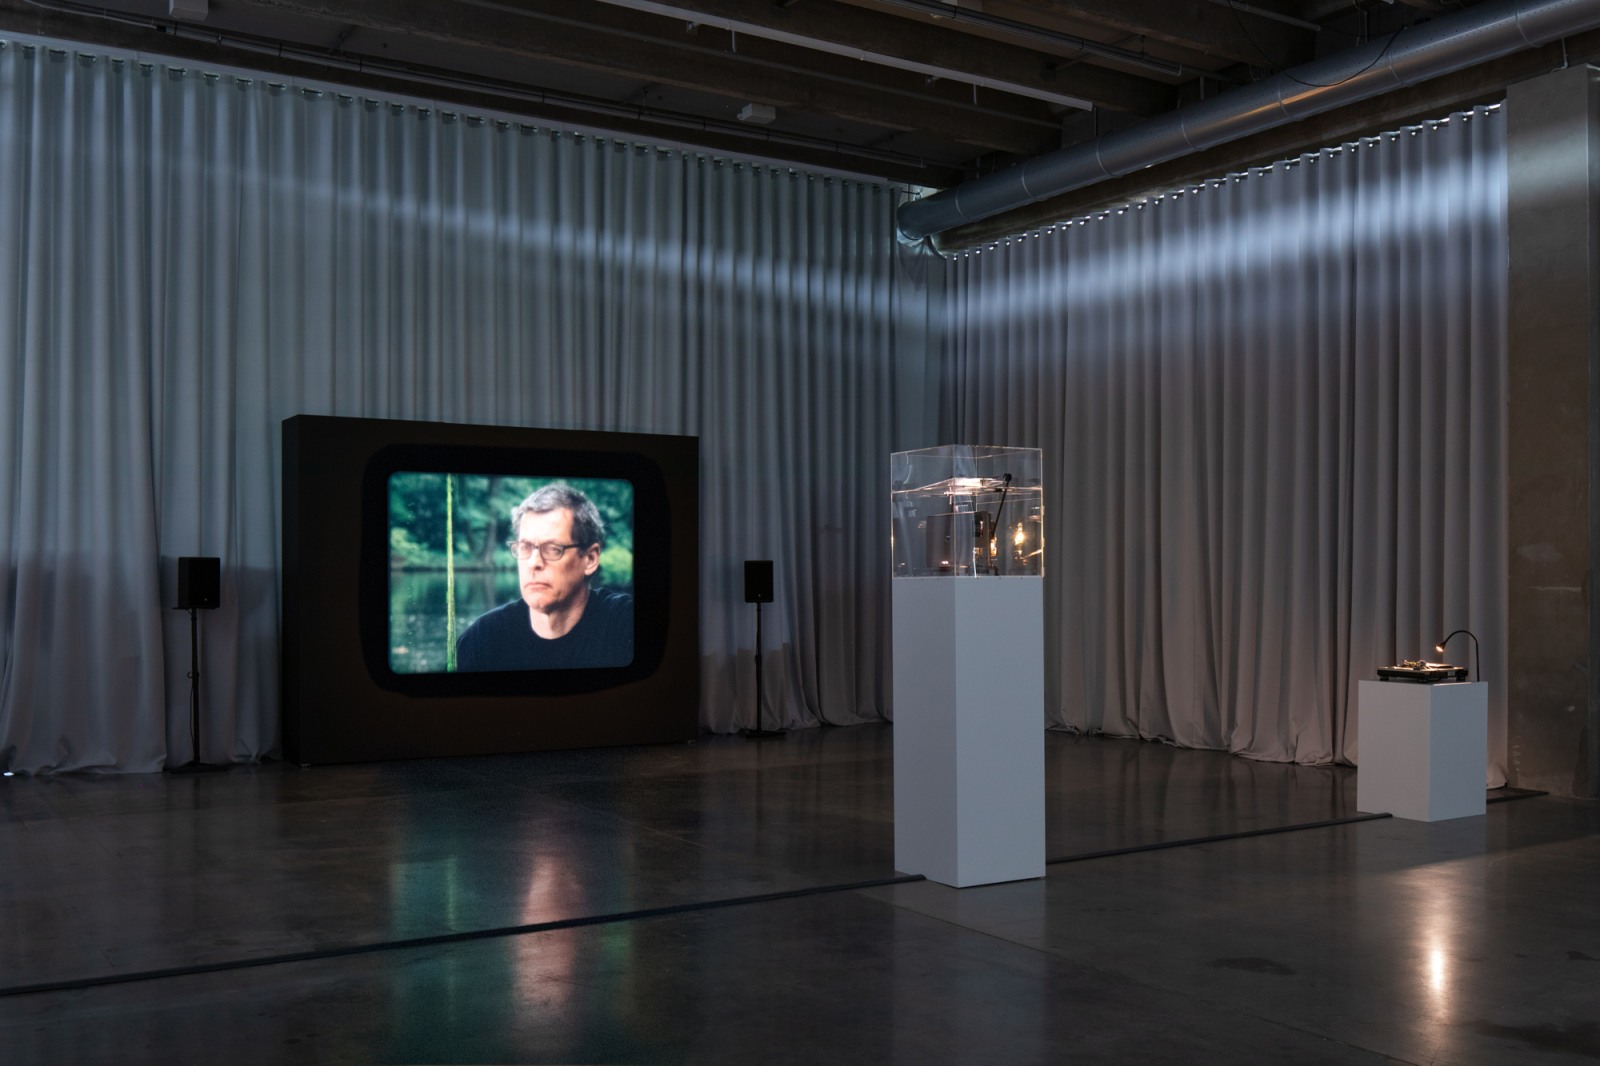 <div class="image_caption_container"><div class="image_caption">Exhibition view: <strong>Phonokinetoscope</strong>, Garage Museum of Contemporary Art, Moscow, 2021. Photo © Ivan Erofeev</div></div>